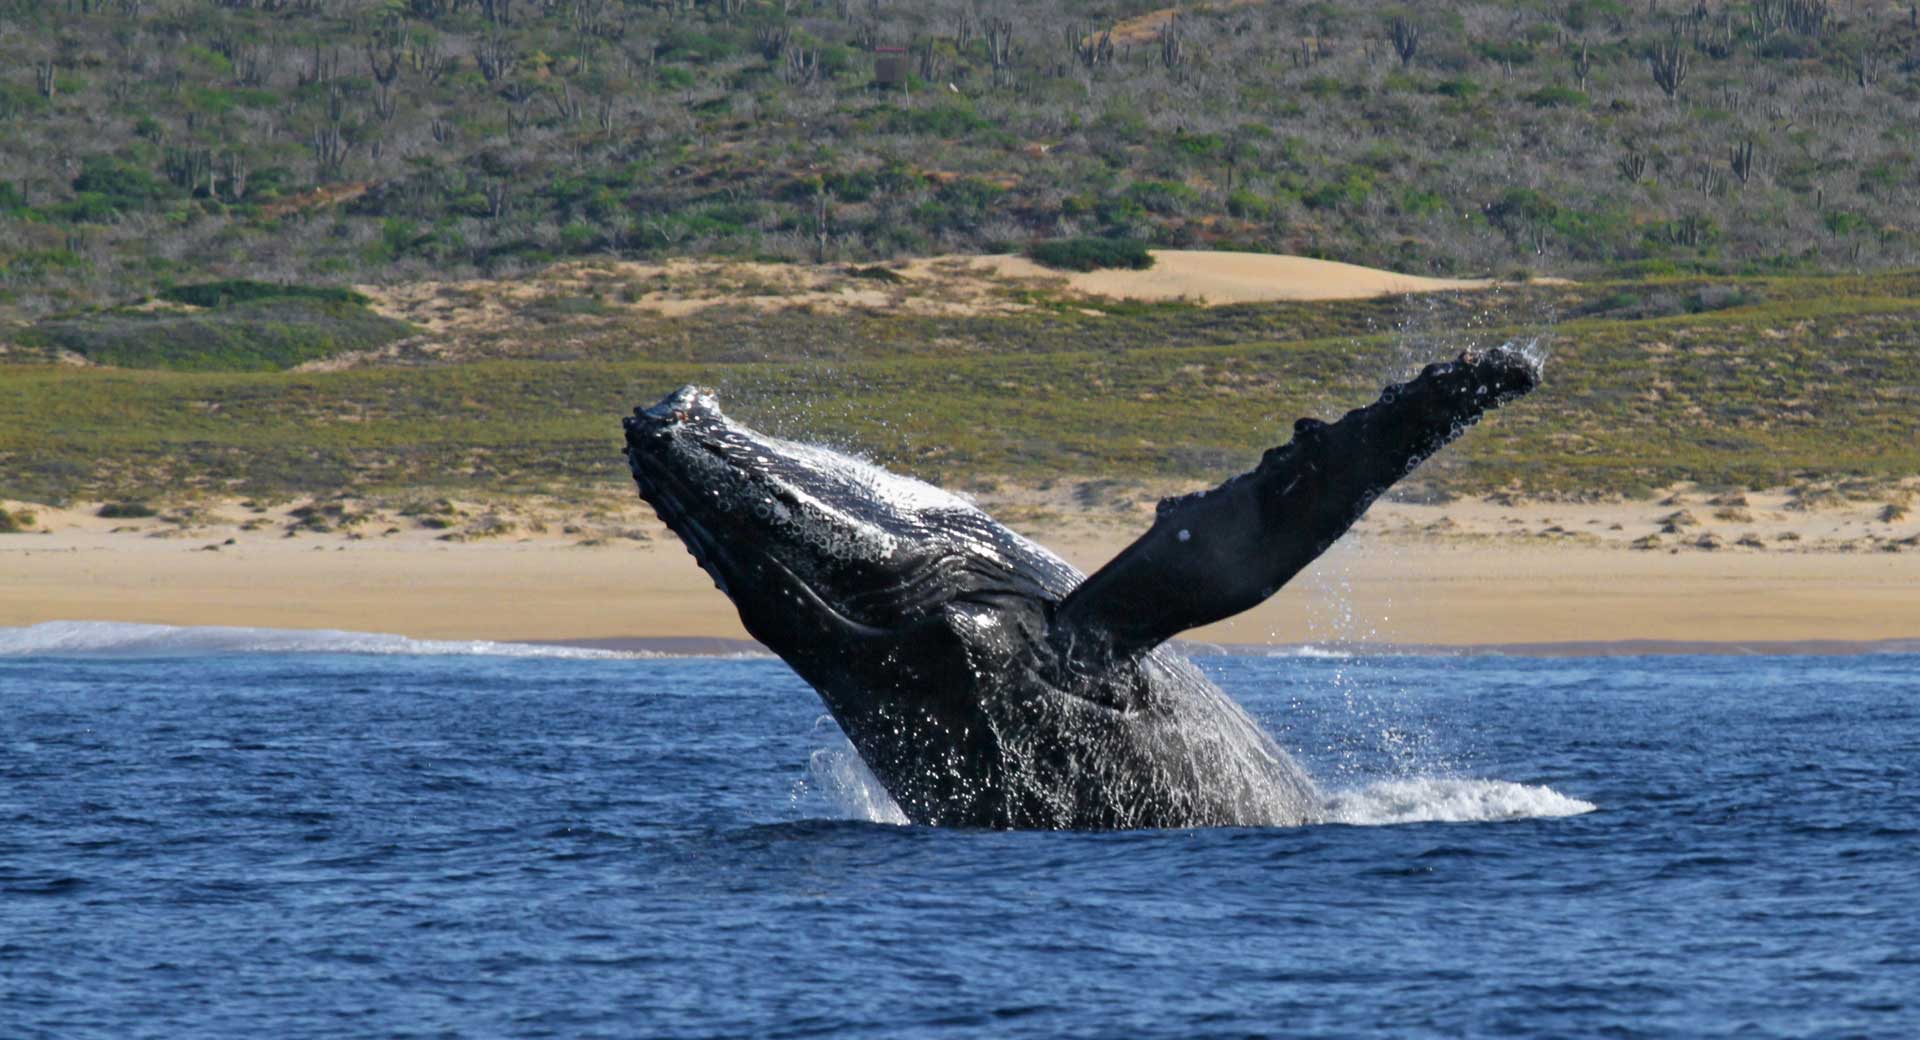 Humpback whale watching in Cabo